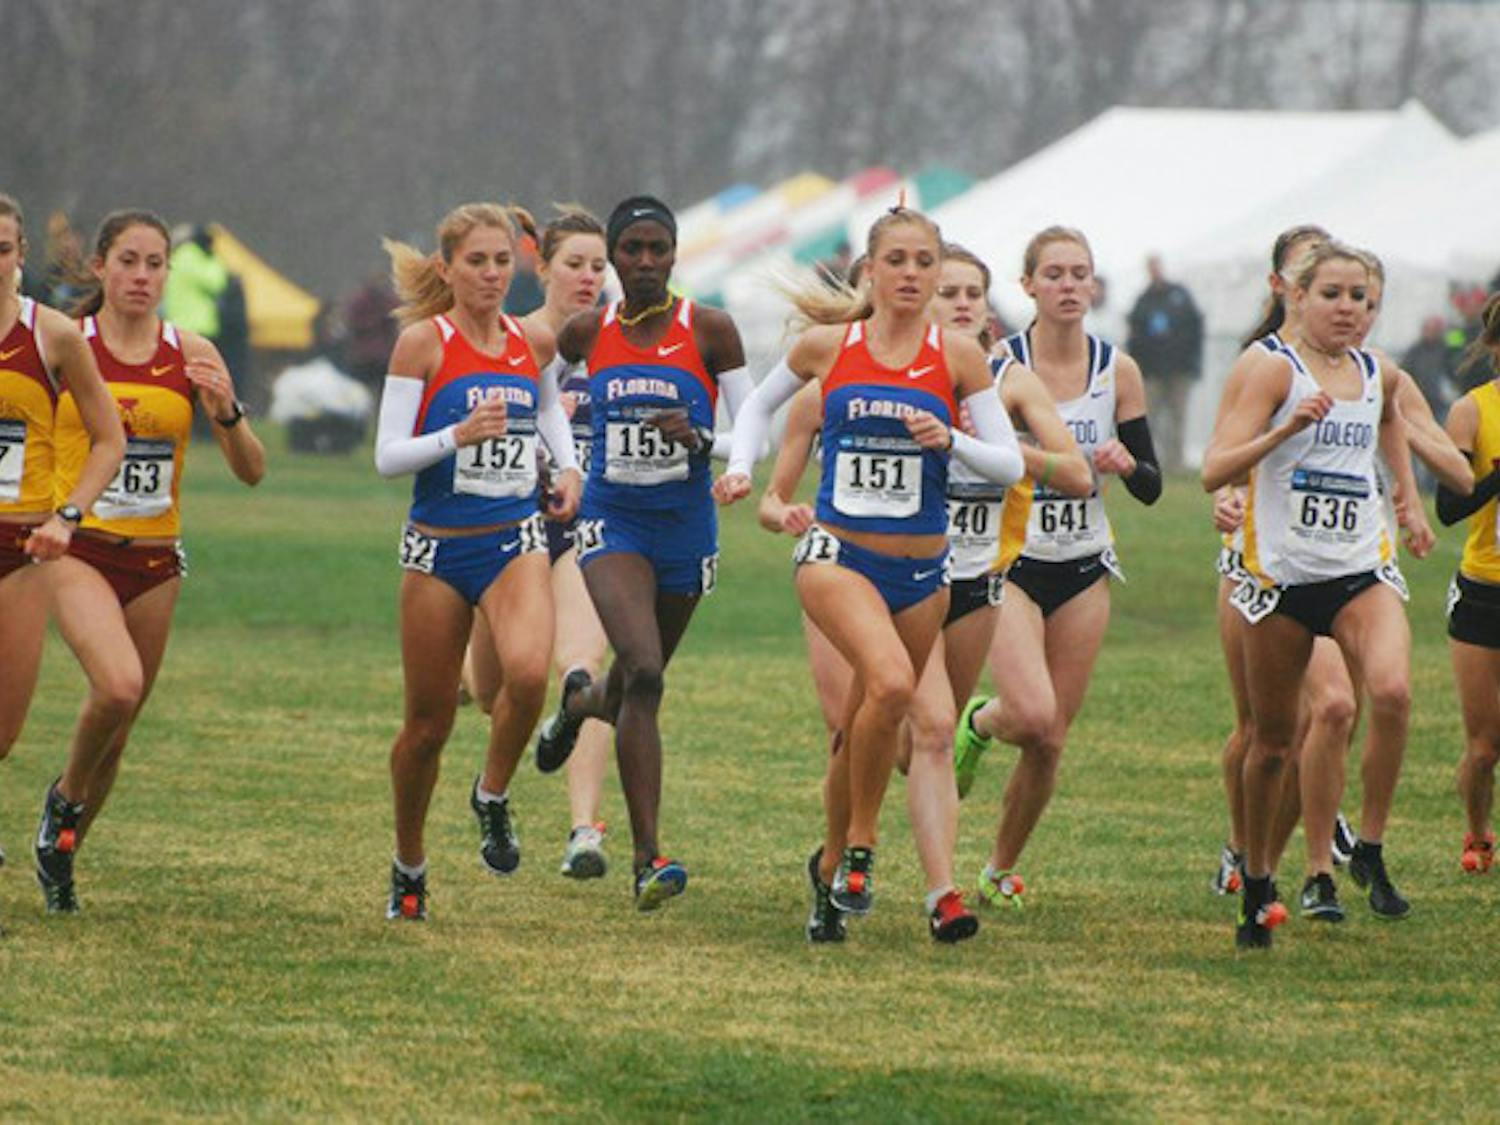 Florida distance runner Genevieve LaCaze (151) runs with team members Florence N’Getich (153) and Cory McGee (152) during the NCAA Championship race on Nov. 21. LaCaze finished in 42nd place and posted the second best time for a Gator since 1997.